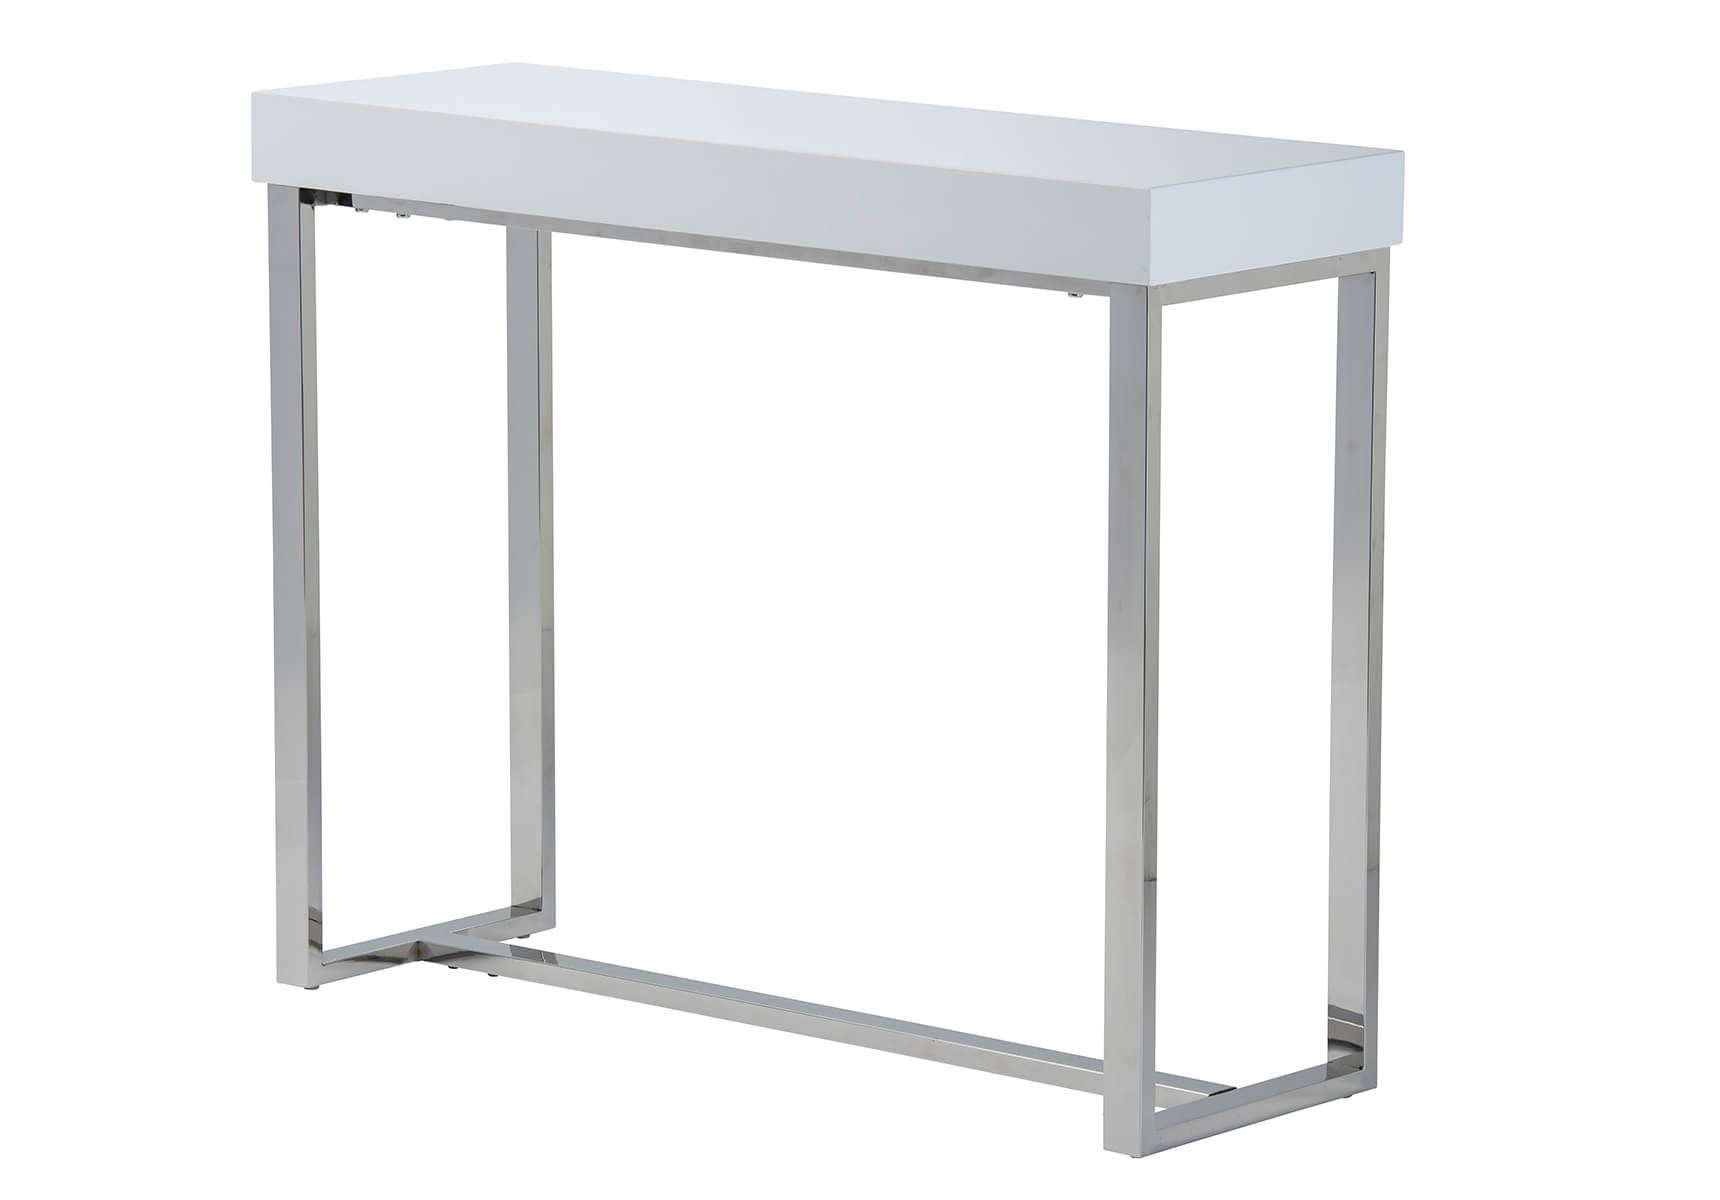 Franklin Console Table In White Gloss For Latest White Gloss And Maple Cream Console Tables (View 7 of 10)